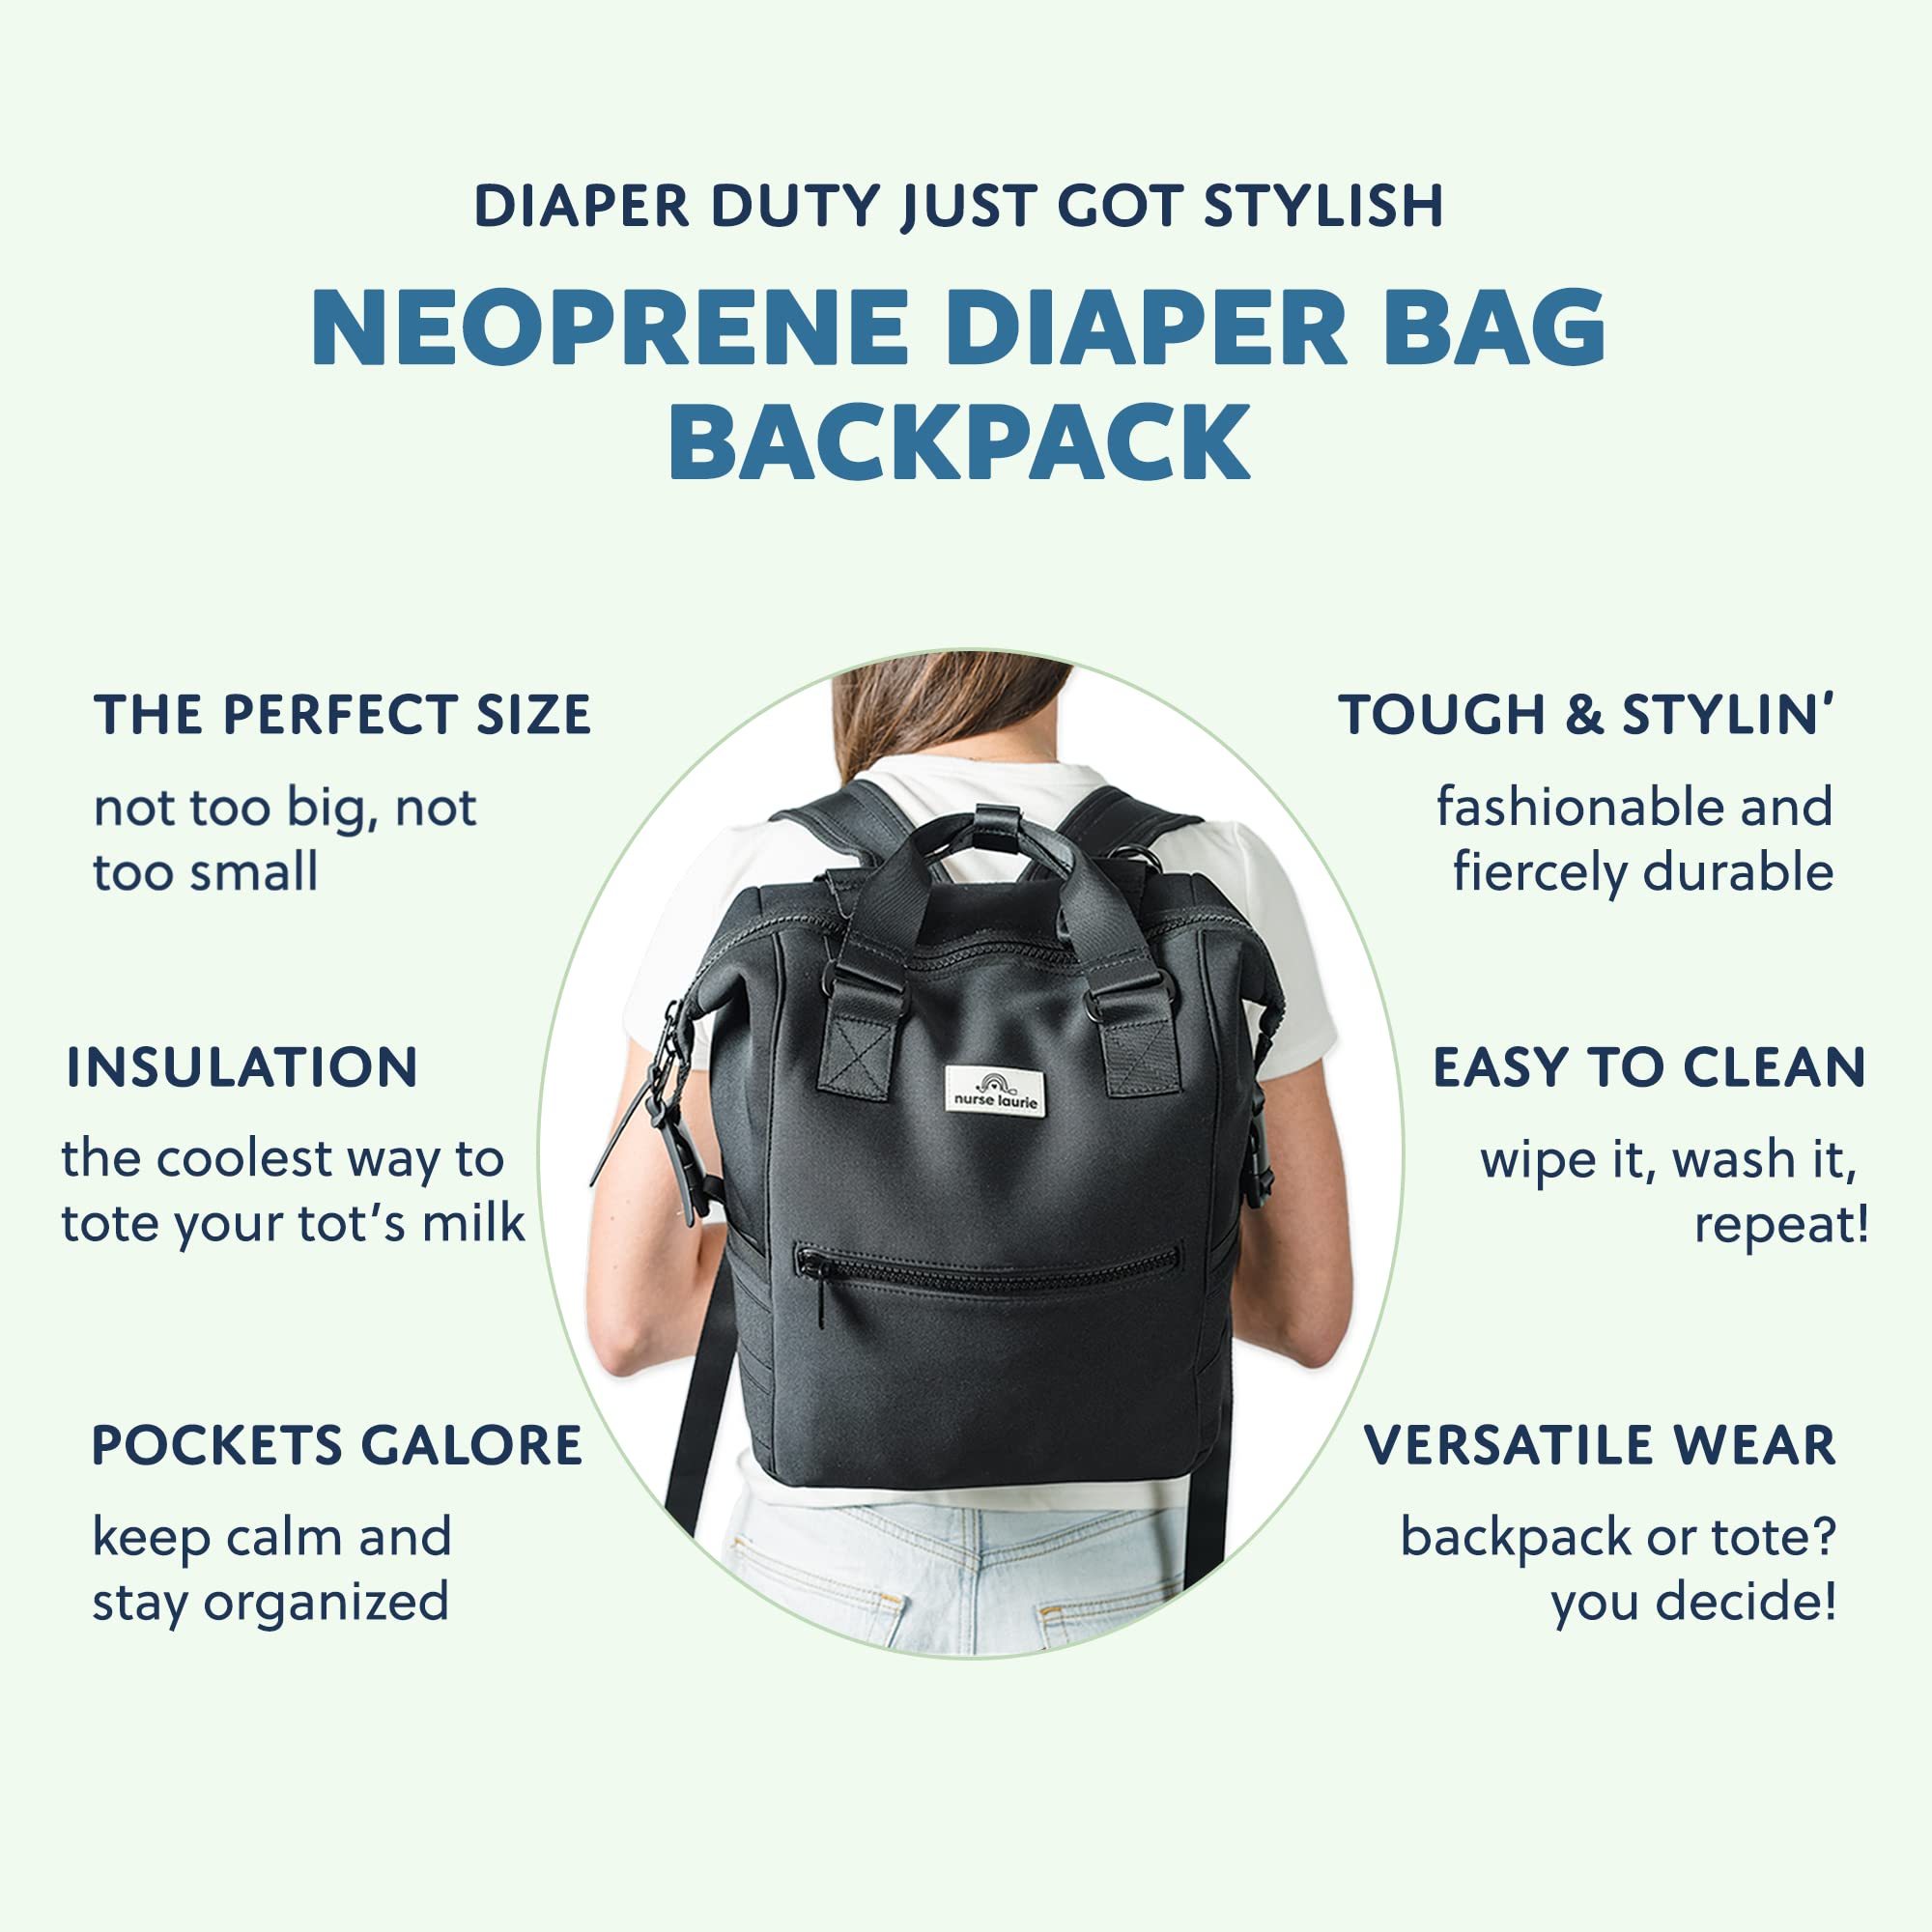 Nurse Laurie Baby Diaper Bag Backpack with Changing Pad, Diaper Pouch & Stroller Straps - Multifunction, Insulated Pockets, Neoprene Diaper Bags - Travel Bag for Maternity and Baby Essentials - Black